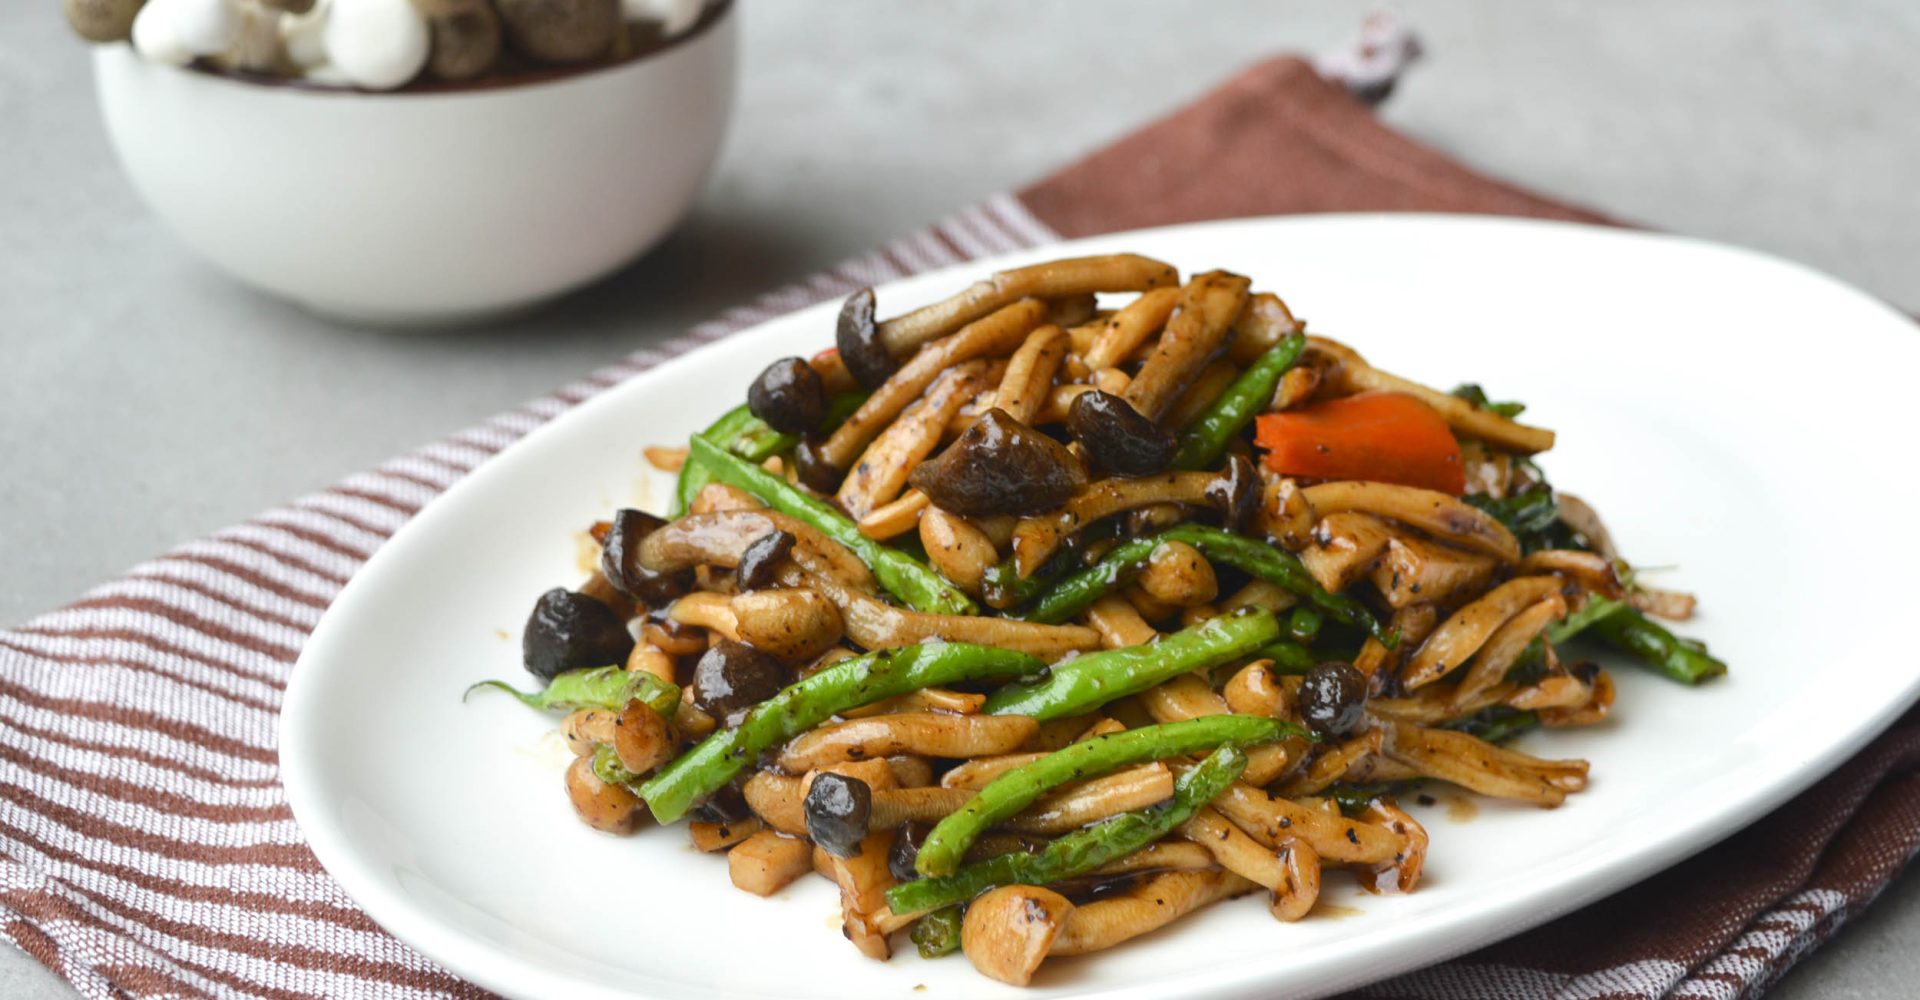 Mixed mushrooms with french beans in truffle paste